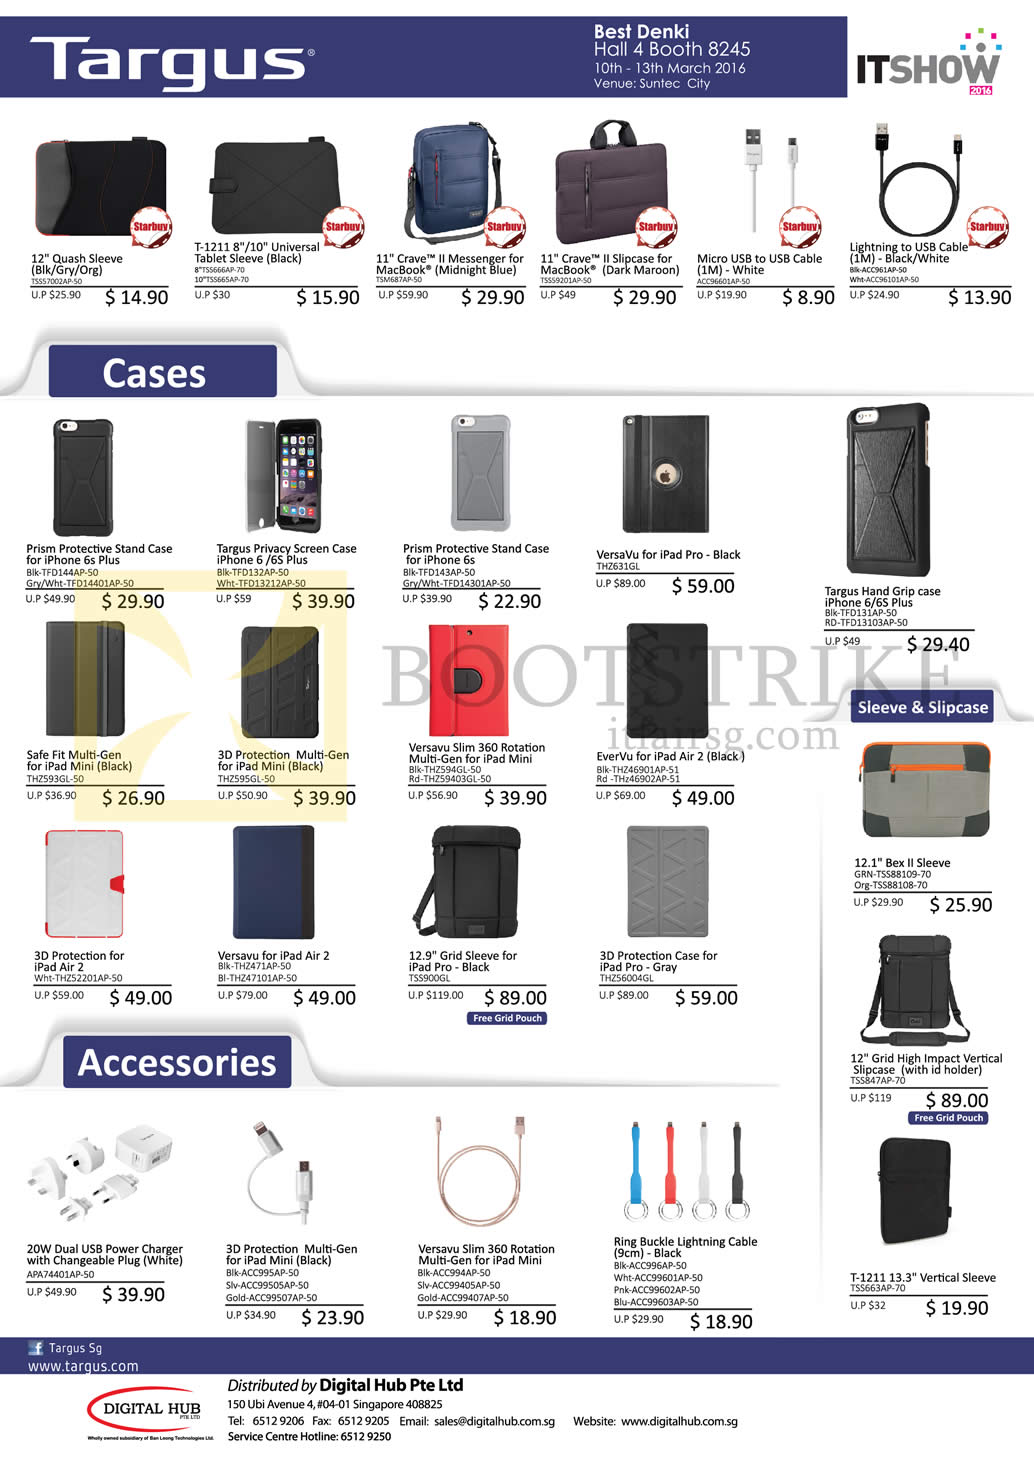 IT SHOW 2016 price list image brochure of Best Denki Targus Cases, Accessories, Sleeves, Slipcases, USB Cable, Lightning Cable, Charging Plug